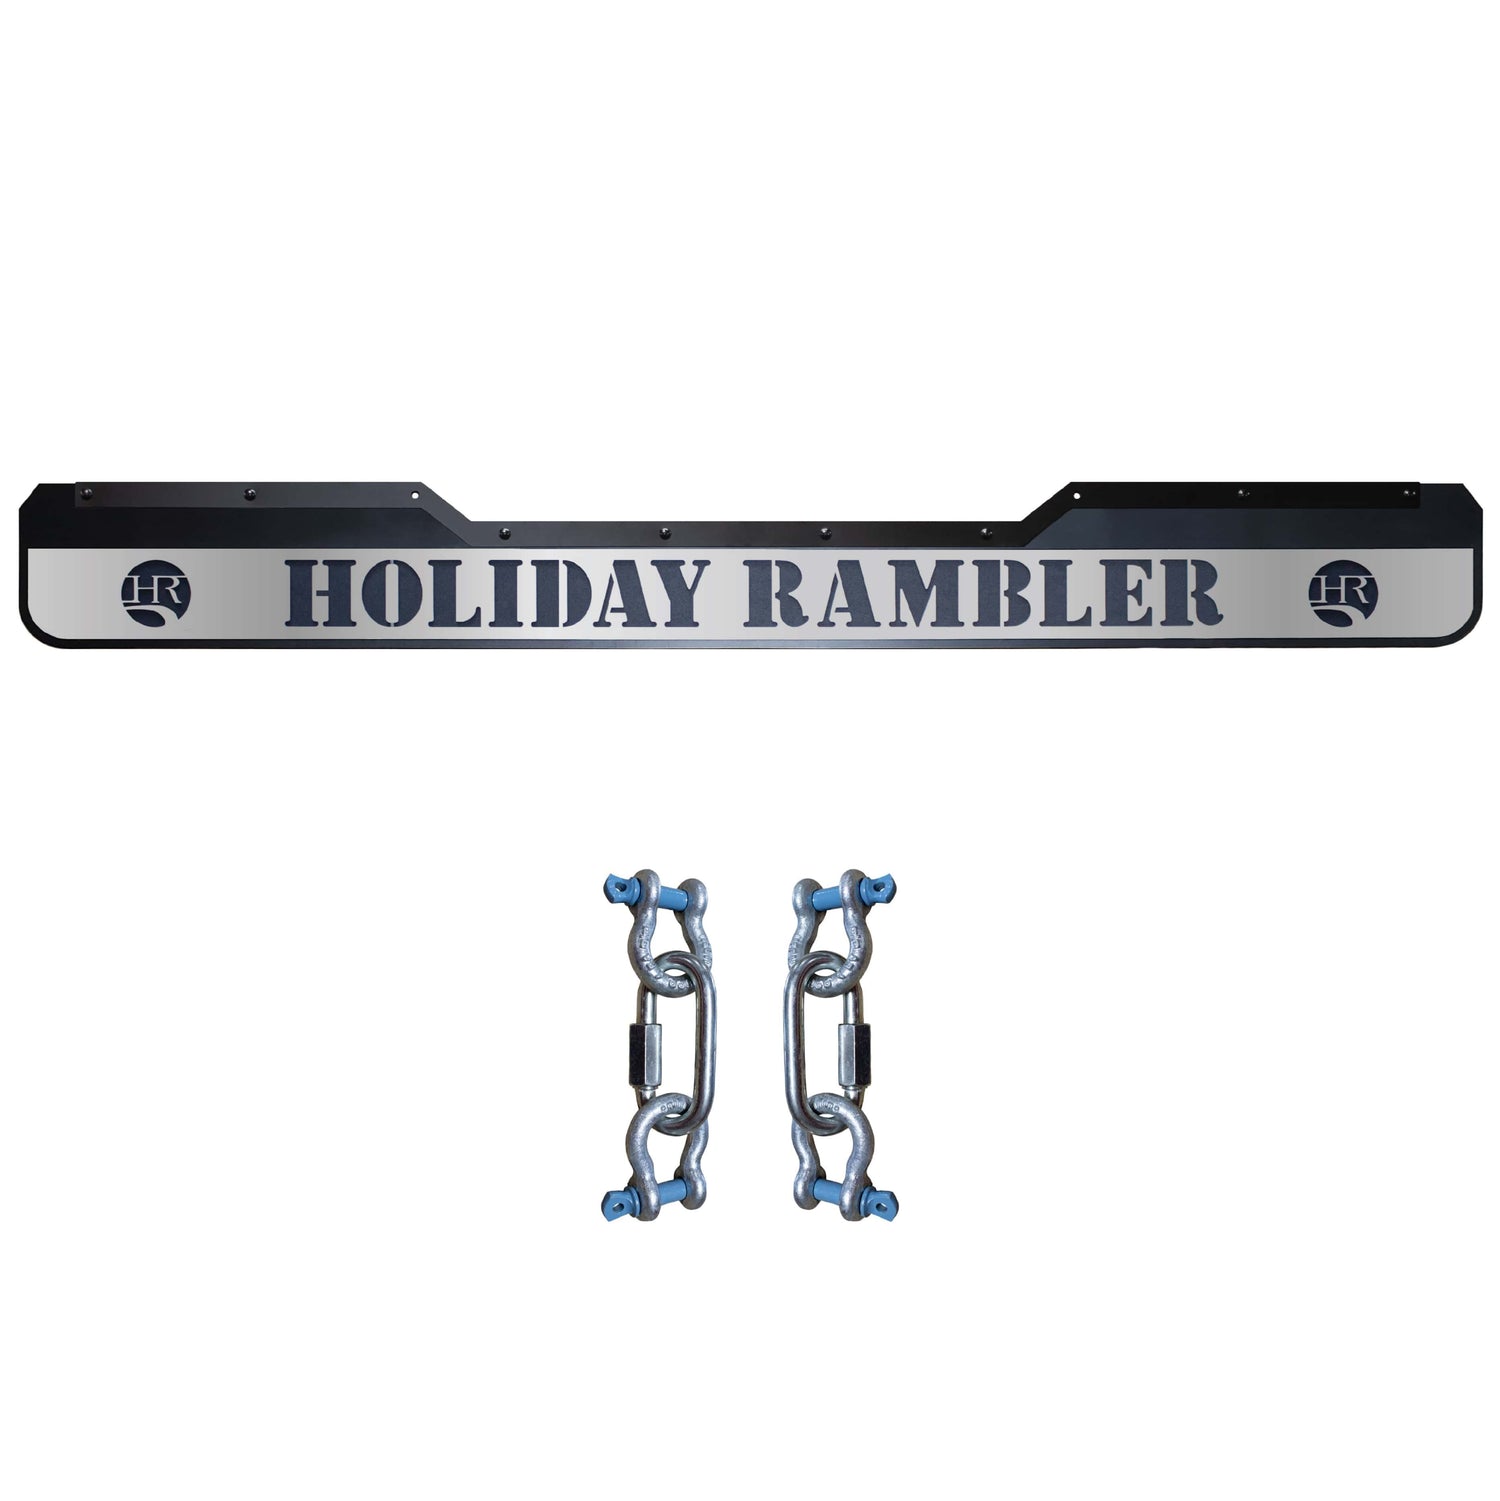 Future-Sales-Rock-Guard-HOLIDAY-RAMBLER-12-inch-Notched-MFR-H-03N-12-by-95-Center-Notch-Mirror-Finish-Face-Plate-2004-through-2010-hardware